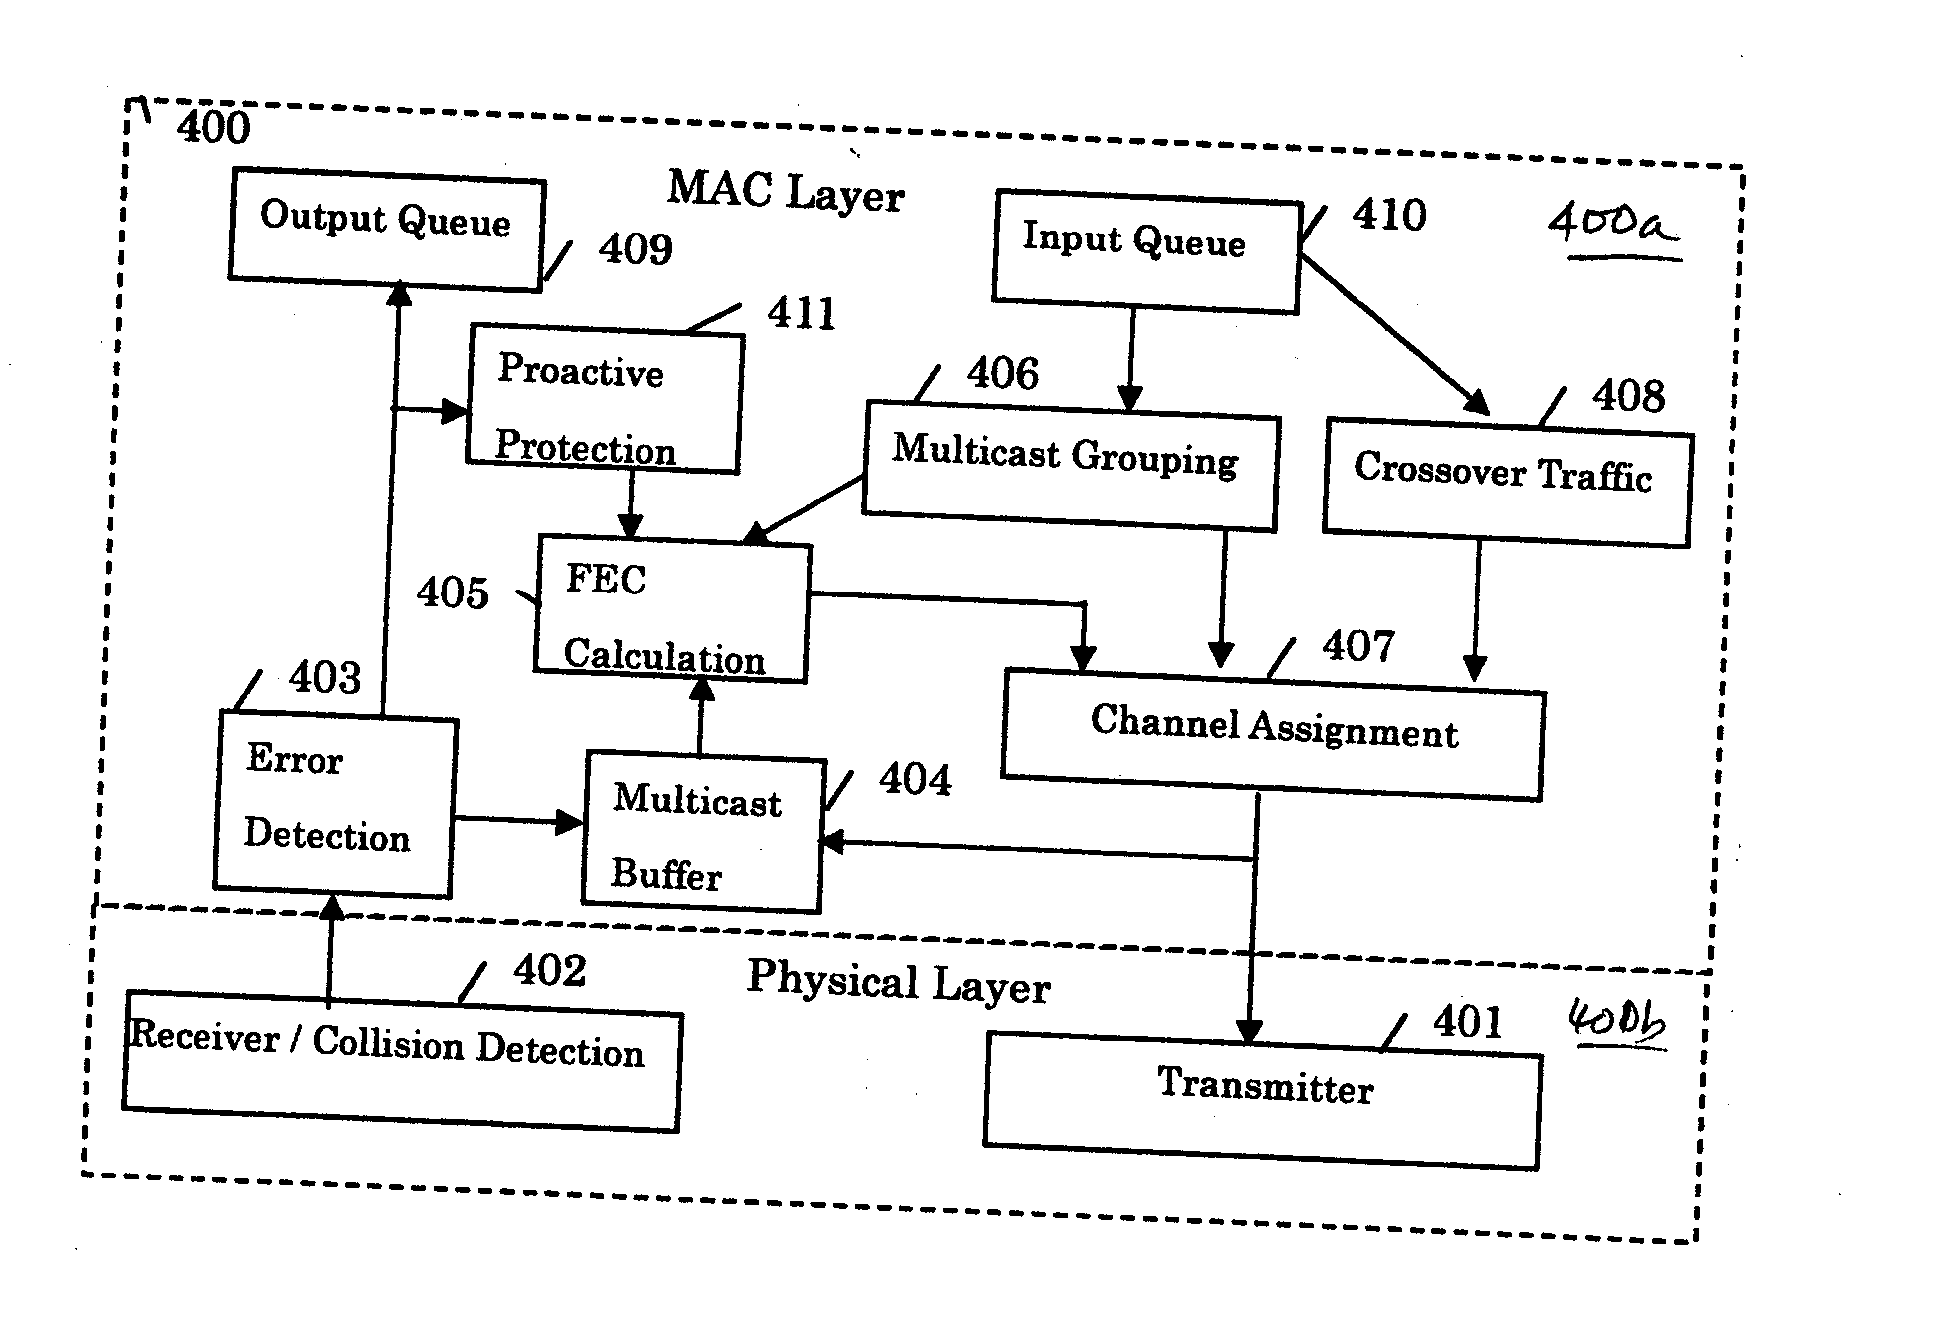 Method for supporting scalable and reliable multicast in tdma/tdd systems using feedback suppression techniques